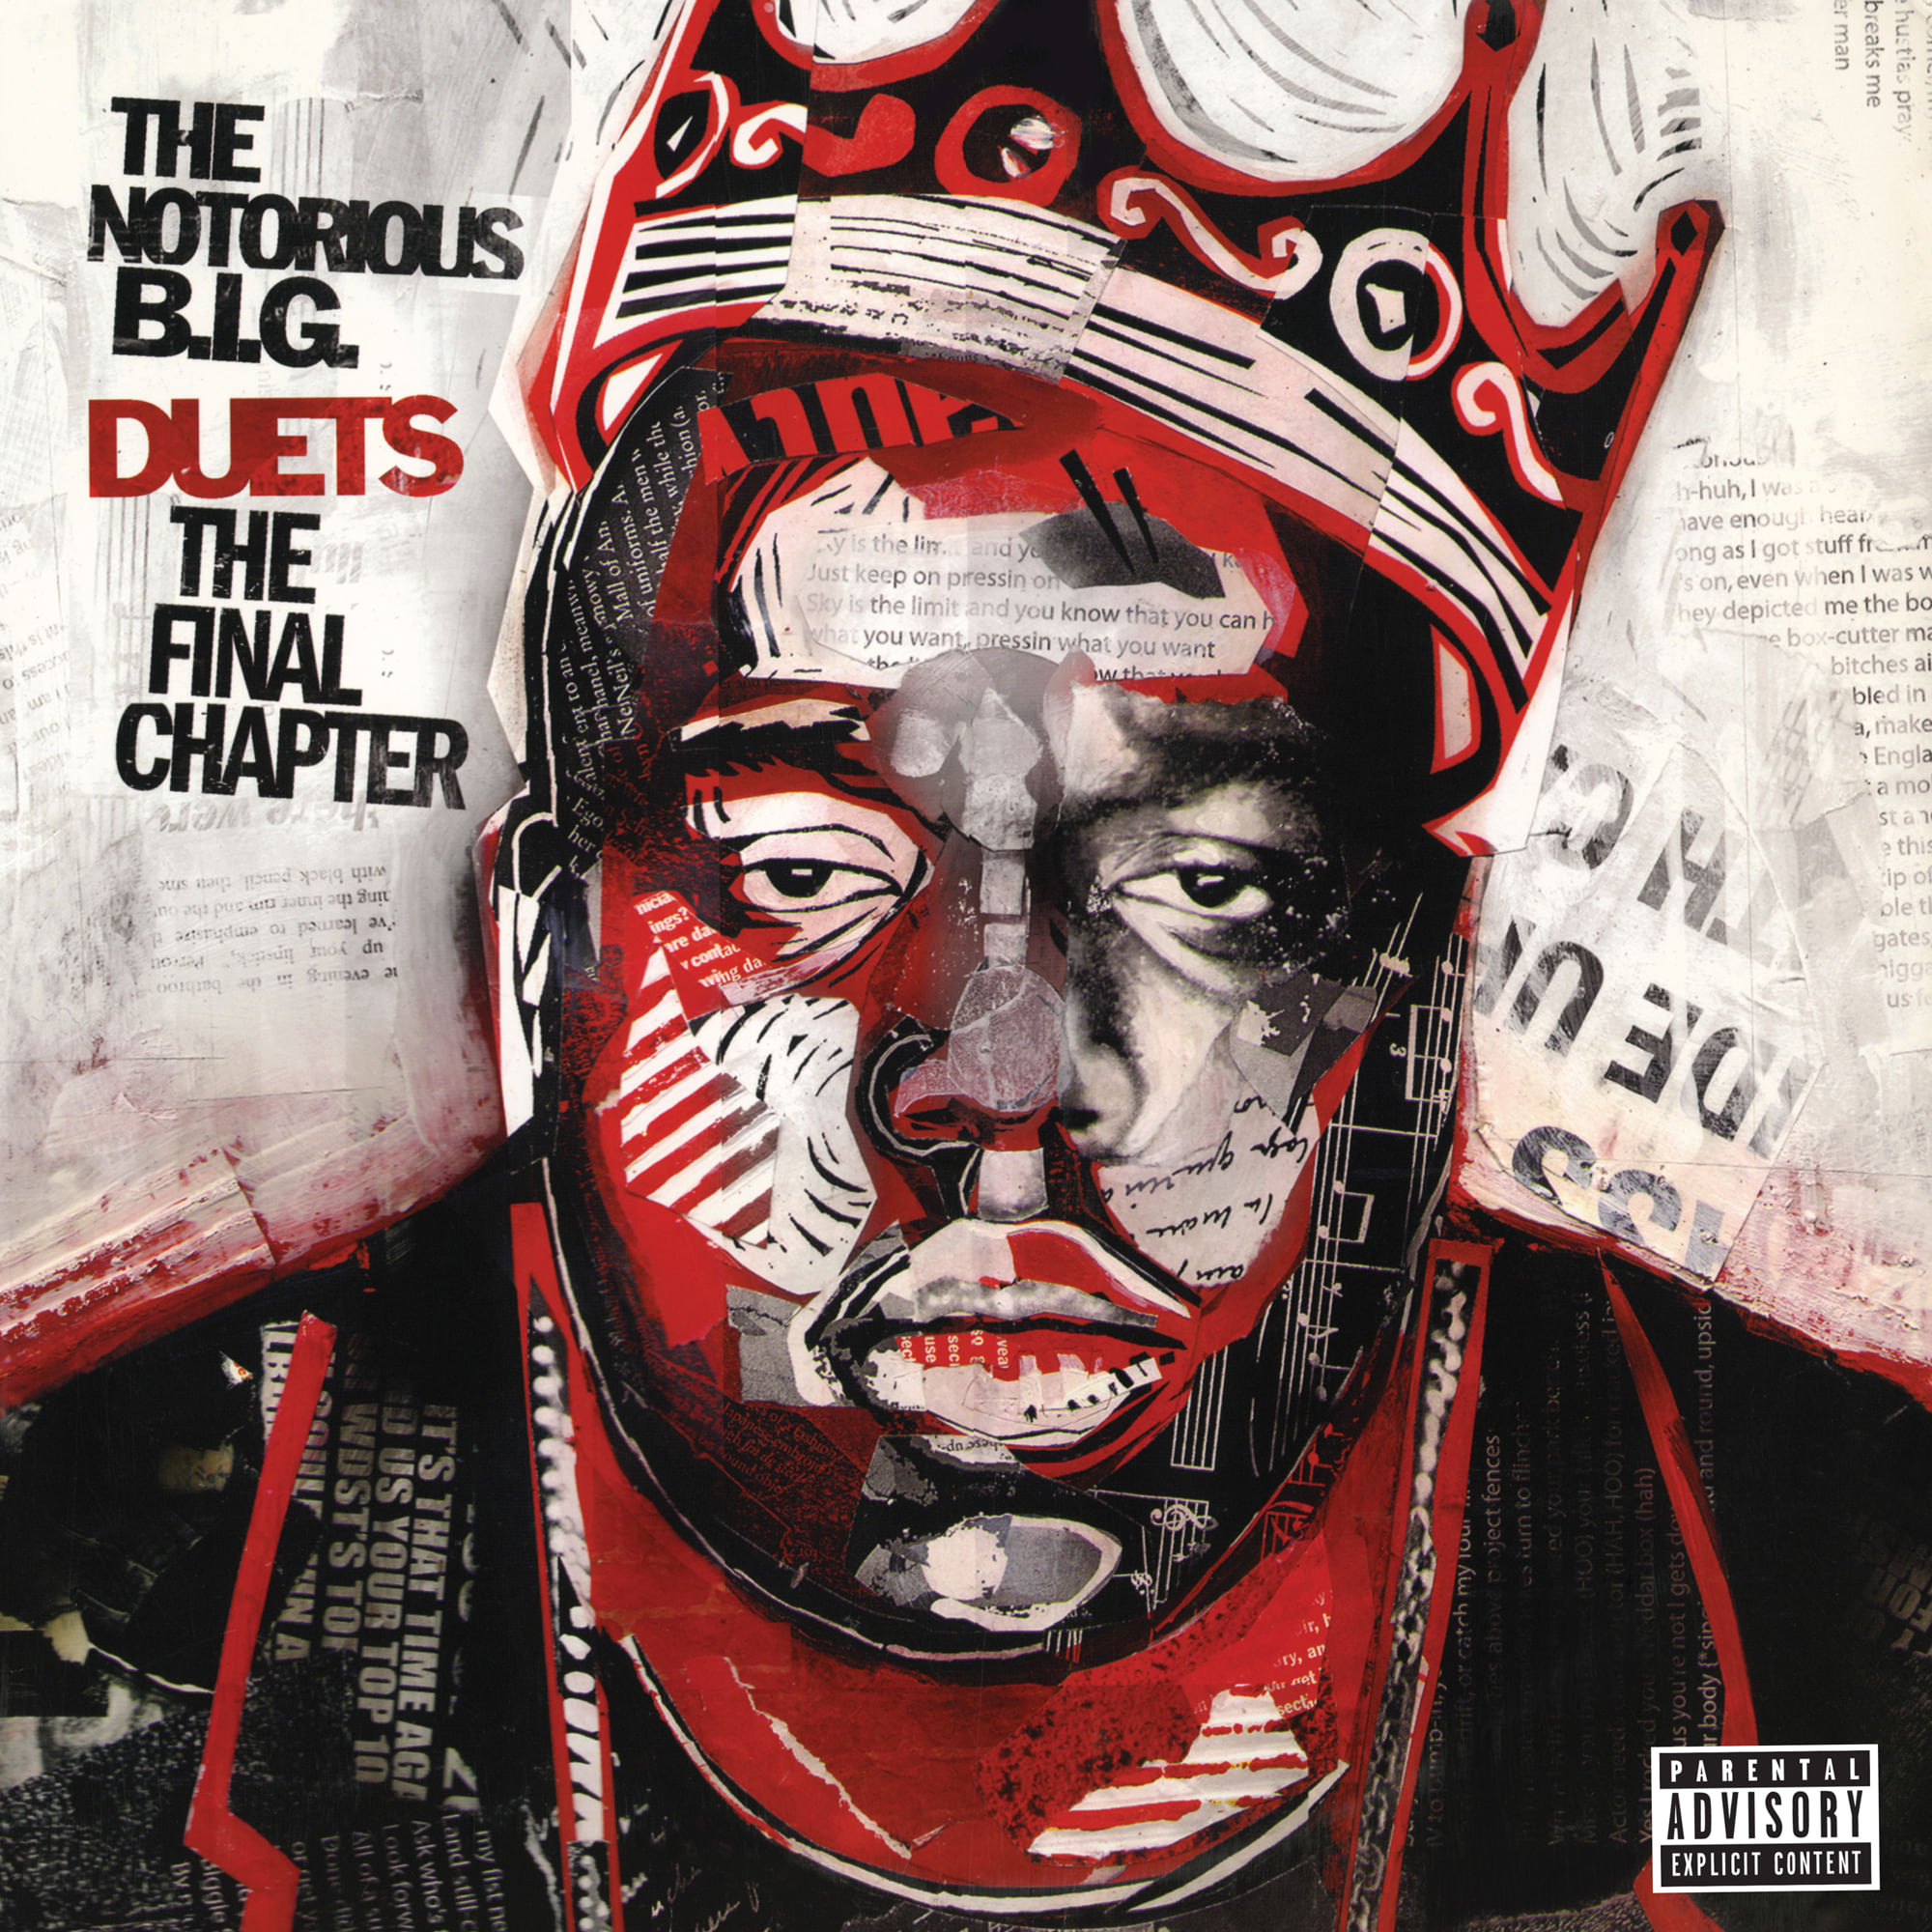 The Notorious B.I.G - Biggie Duets: The Final Chapter (Vinyl) | Cosmo ...